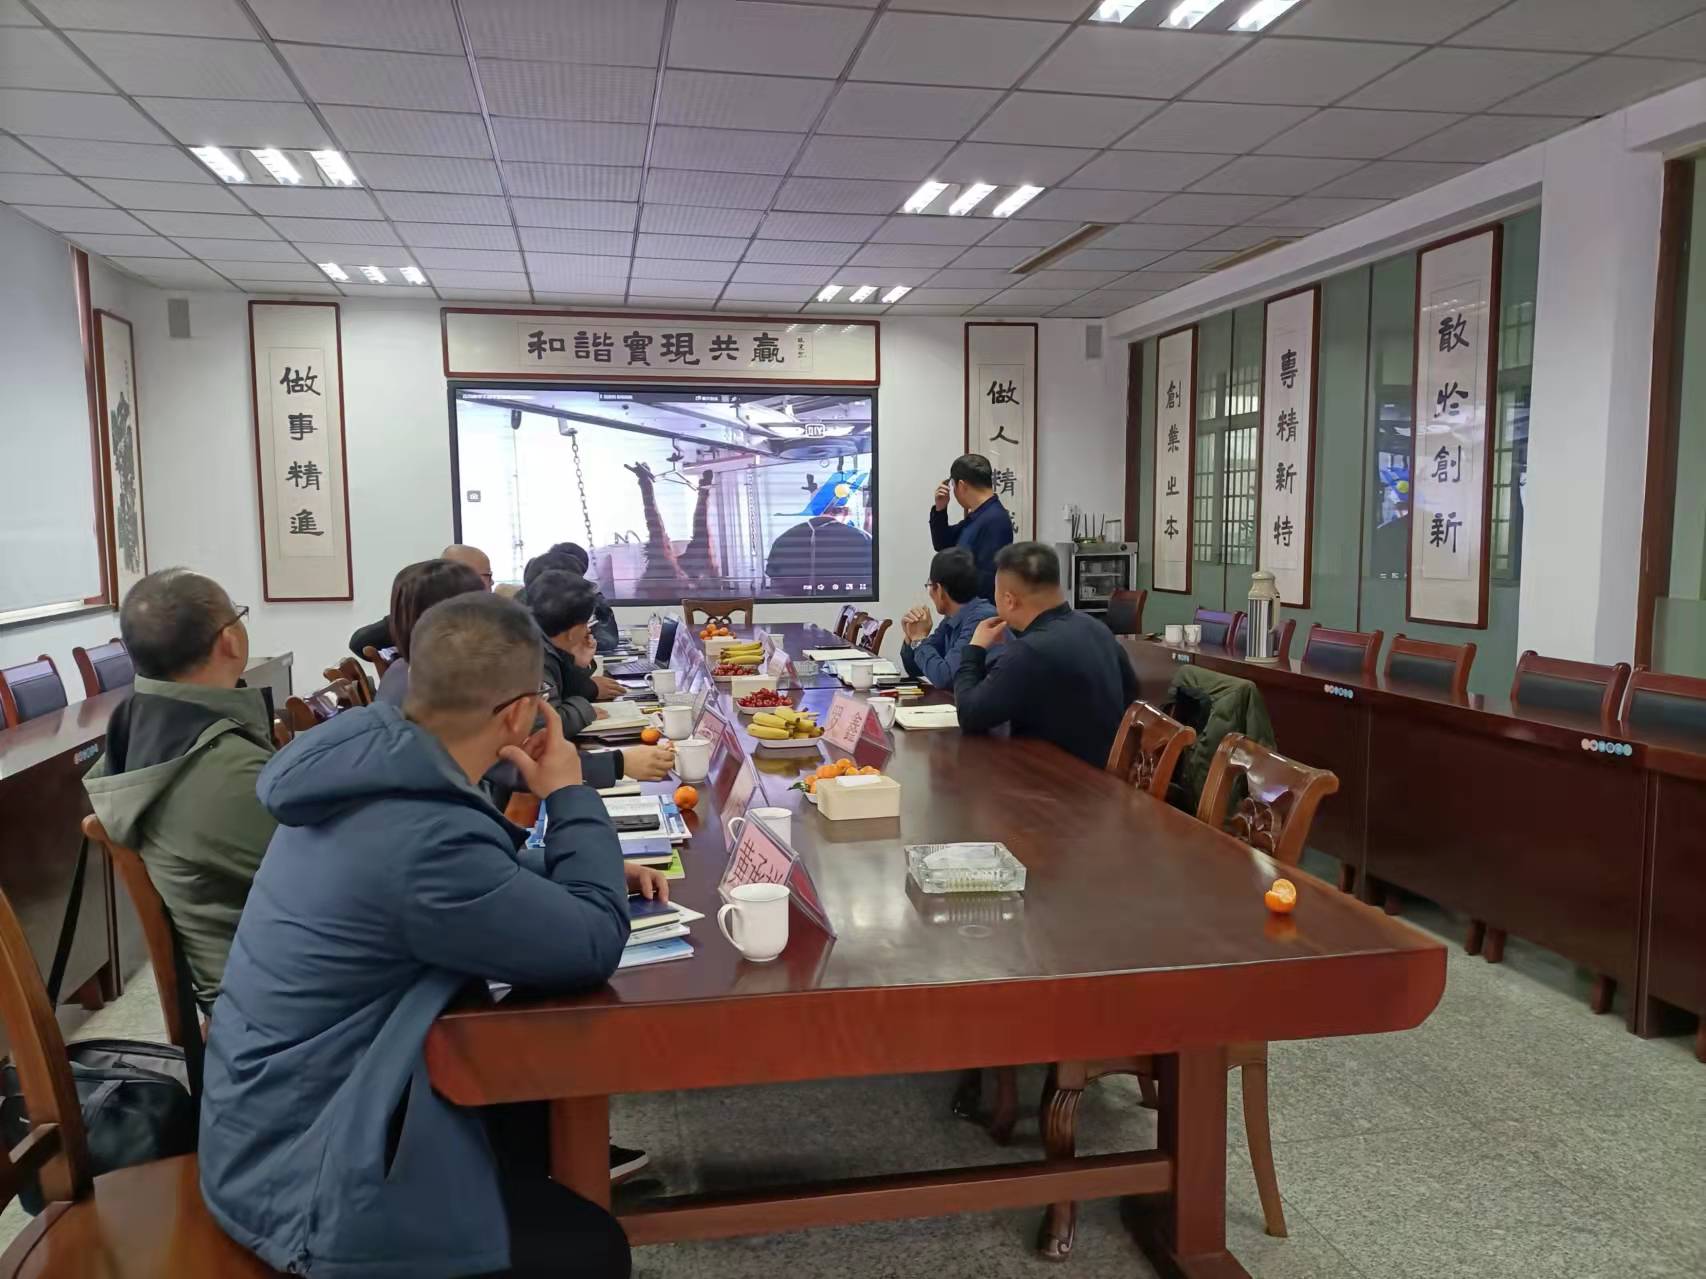 Customers come to Jianhua to visit and inspect